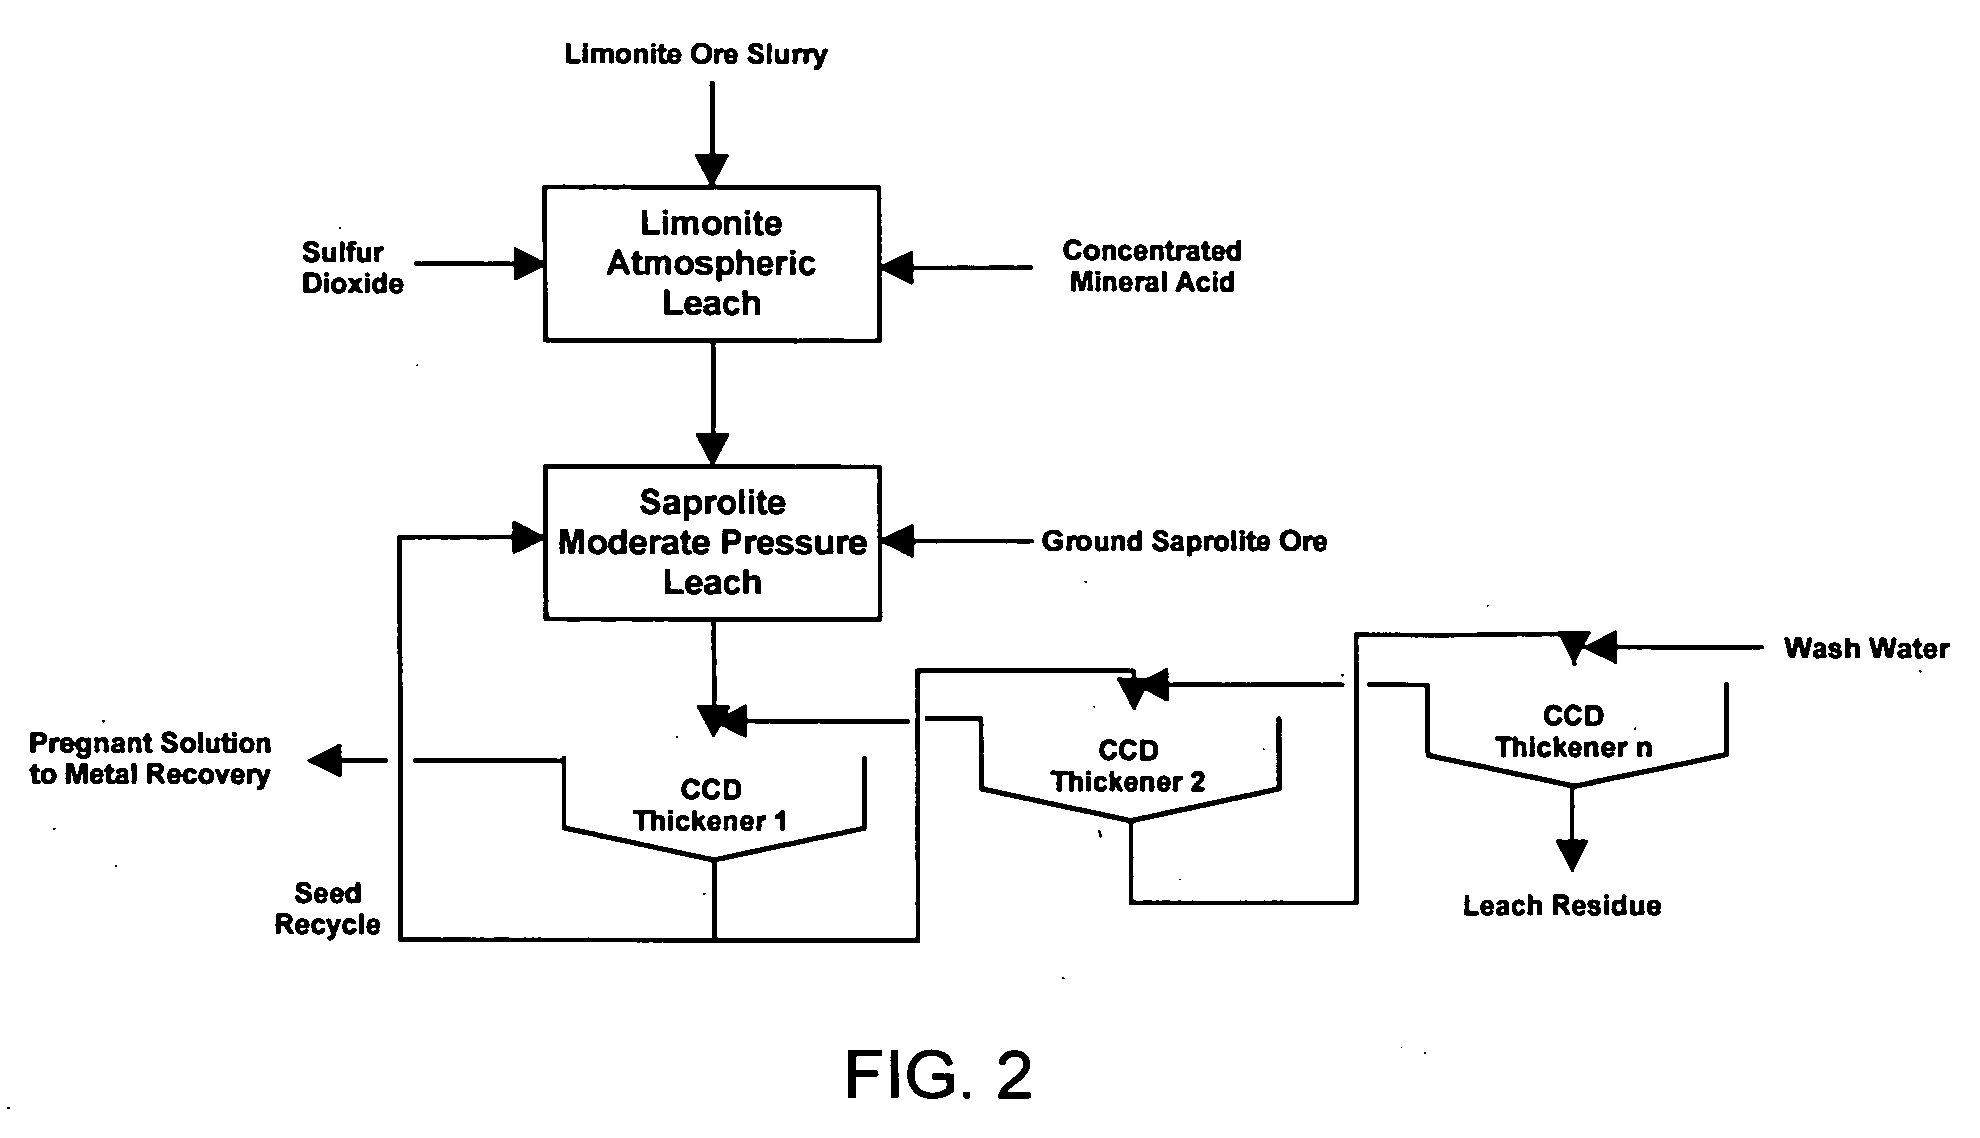 Method for nickel and cobalt recovery from laterite ores by combination of atmospheric and moderate pressure leaching